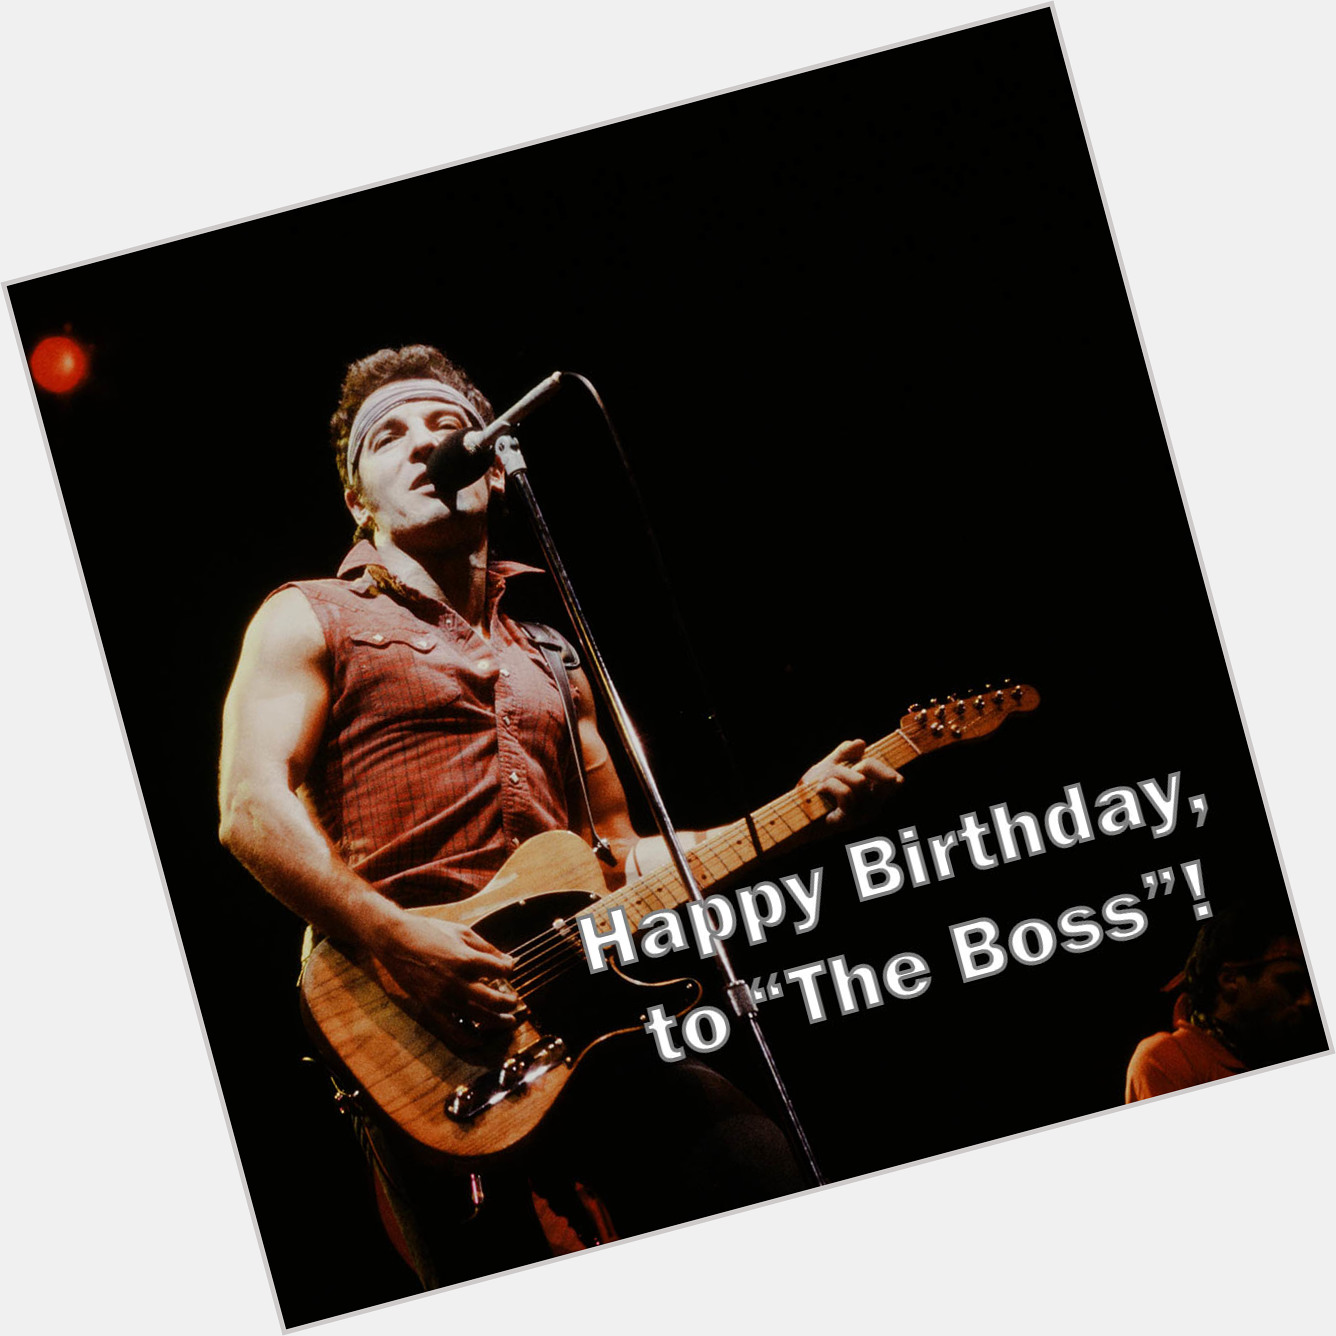 Happy Birthday, Bruce \"The Boss\" is 71 years old today. Join us in wishing him a great day.   